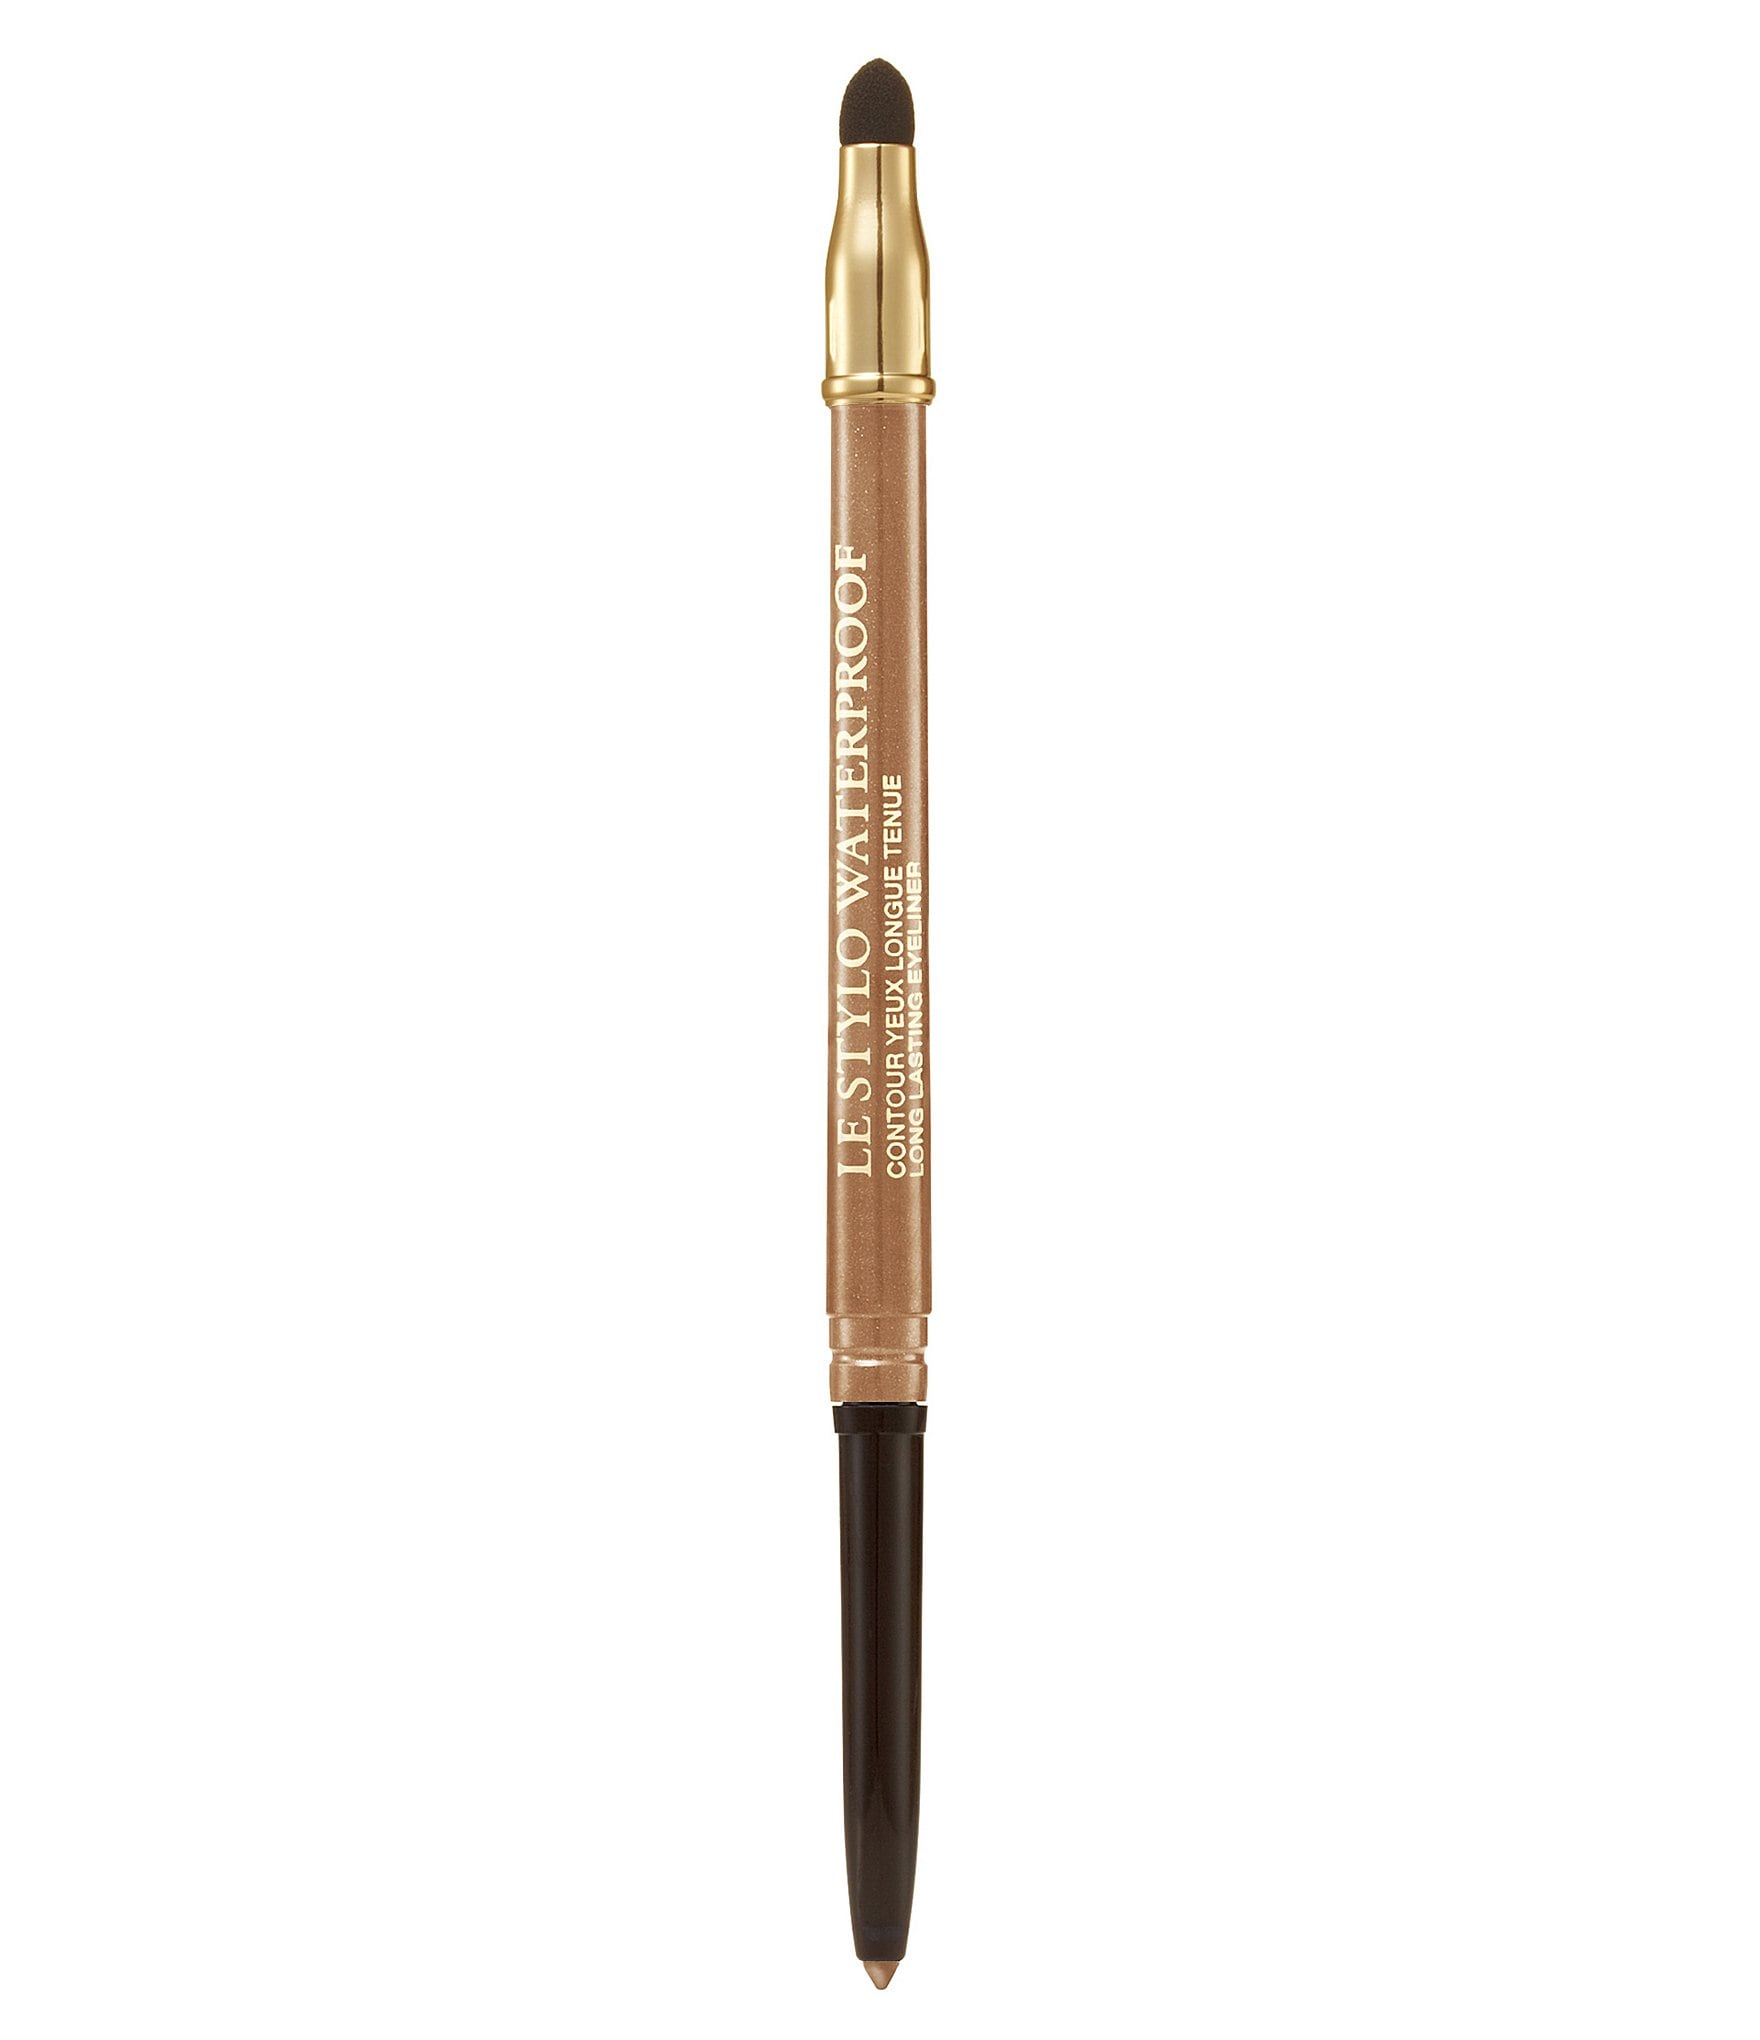  Lancôme Le Stylo Waterproof Eyeliner Pencil - Creamy & Highly  Pigmented - Seamless Blending & Smudging - 04 Bronze Rich : Beauty &  Personal Care